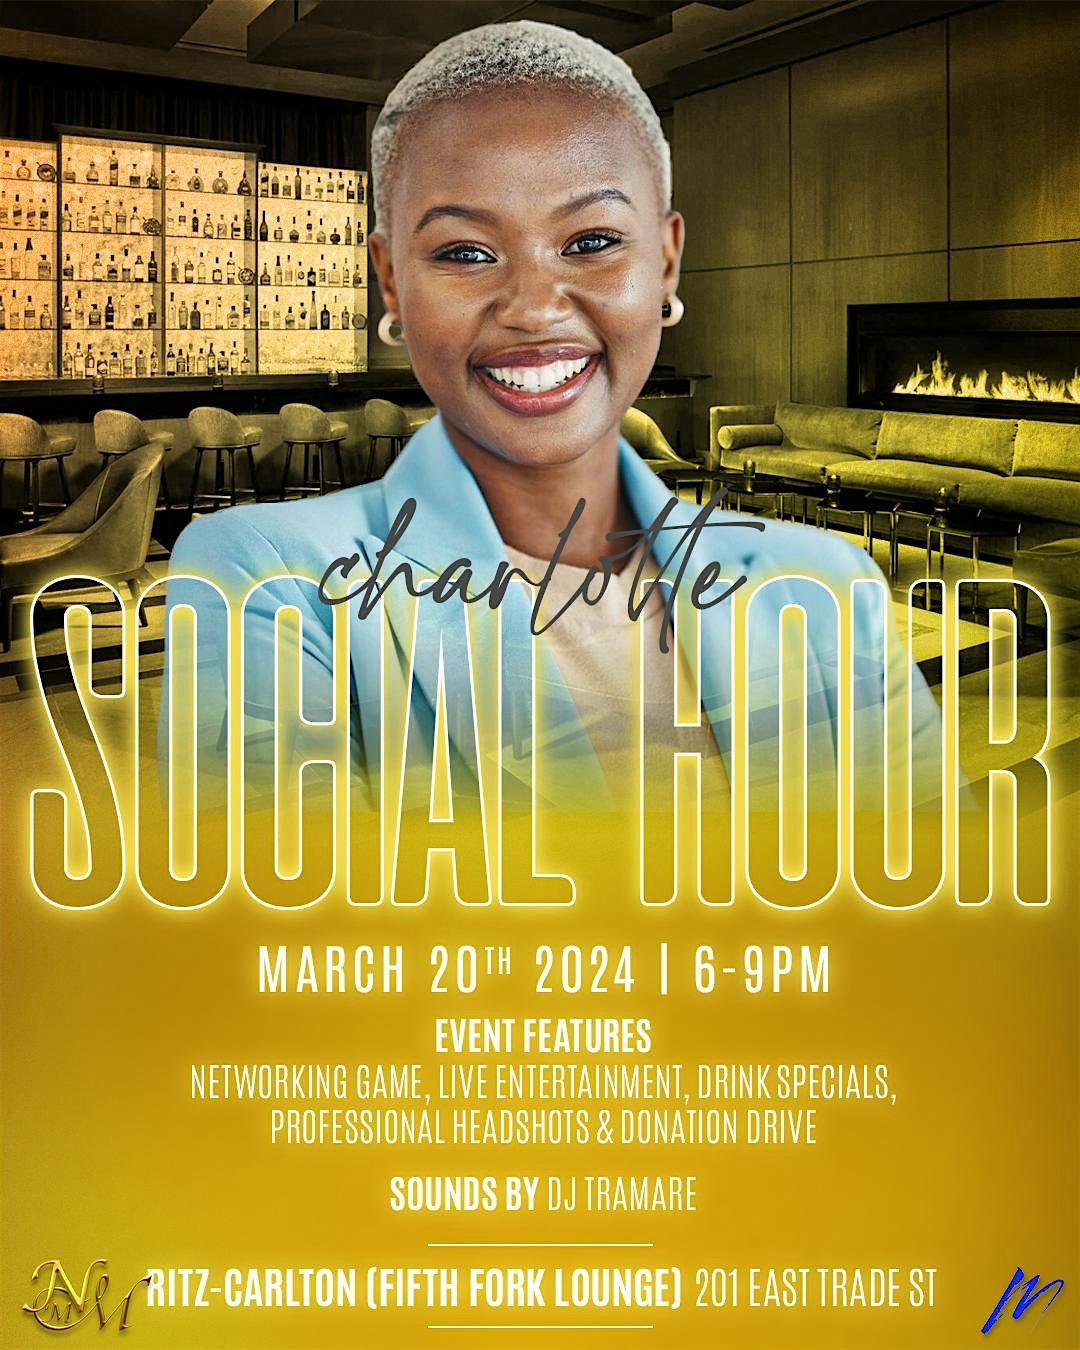 Charlotte Social Hour: ROOFTOP MIXER